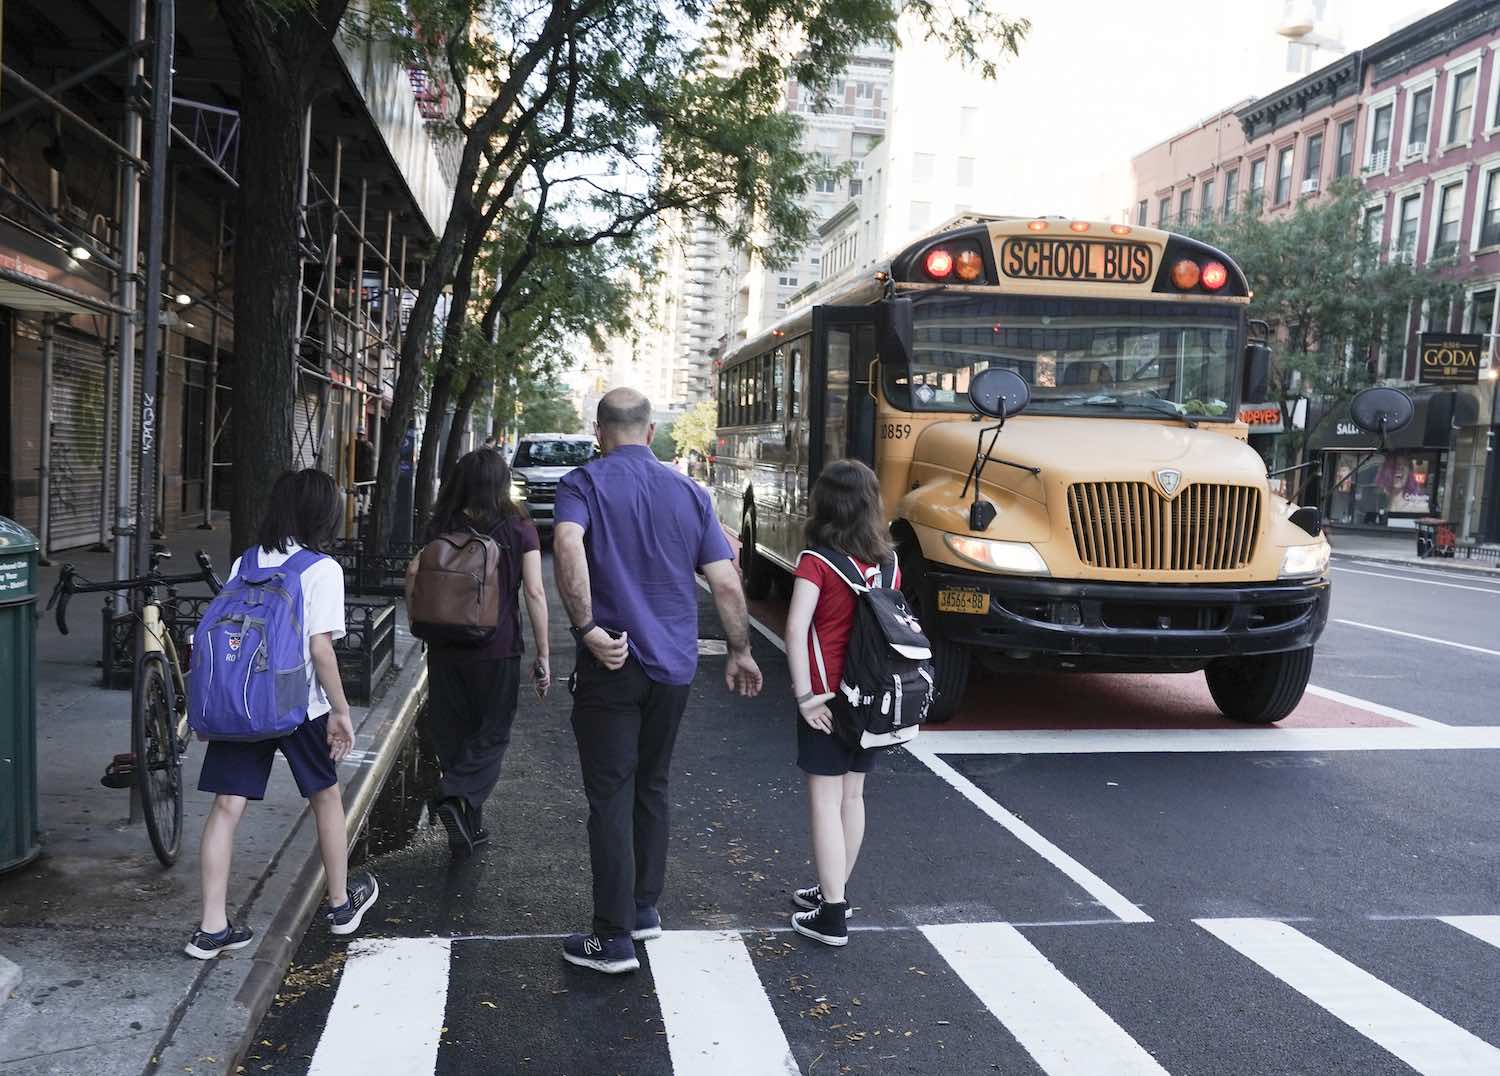 Students board a school bus on a city street in Manhattan New York, a grownup walking behind them.